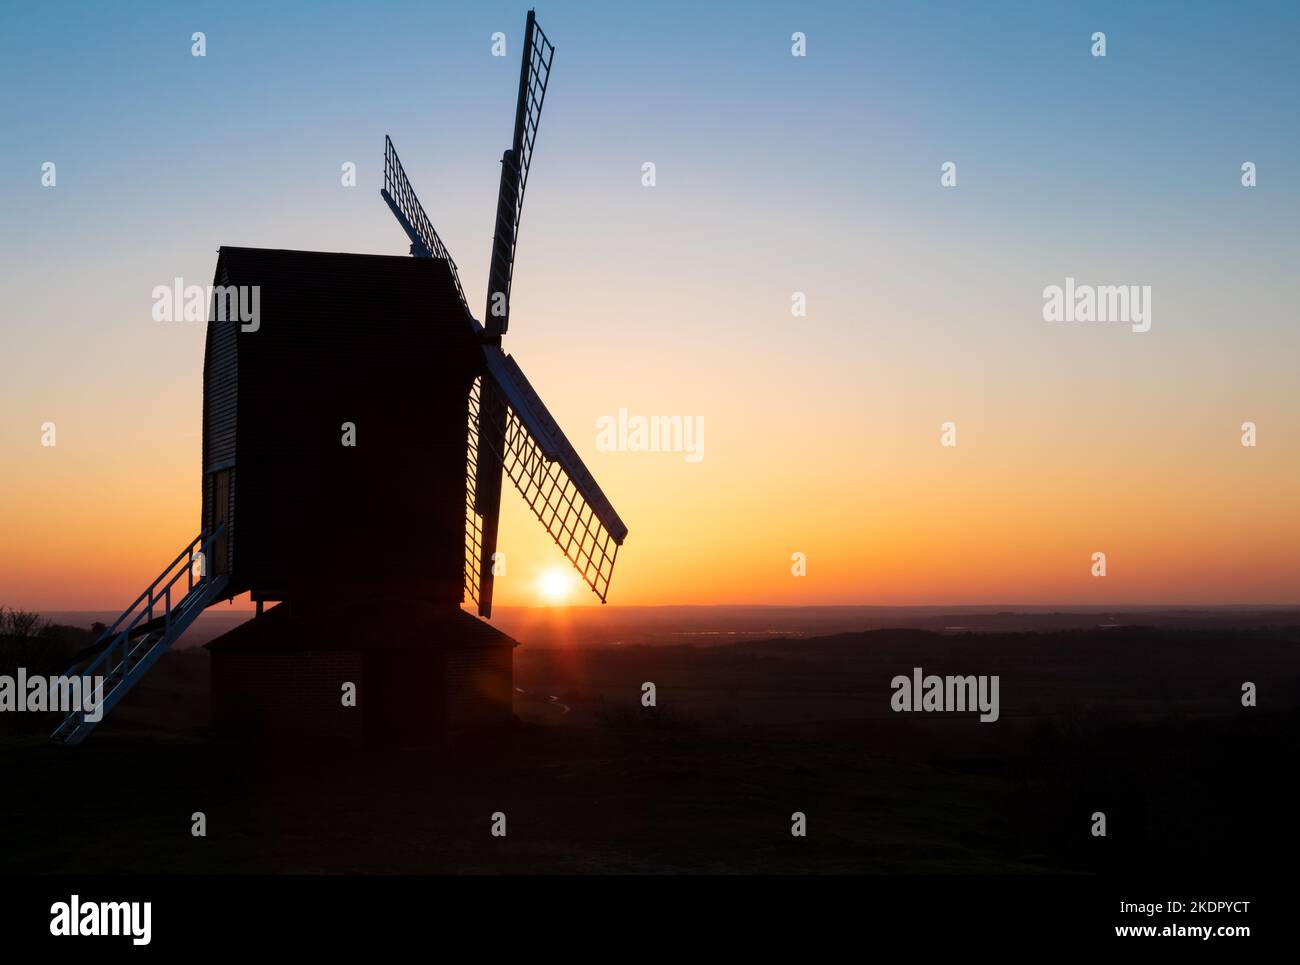 Sun setting on the horizon behind a traditional wooden British windmill at sunset Stock Photo